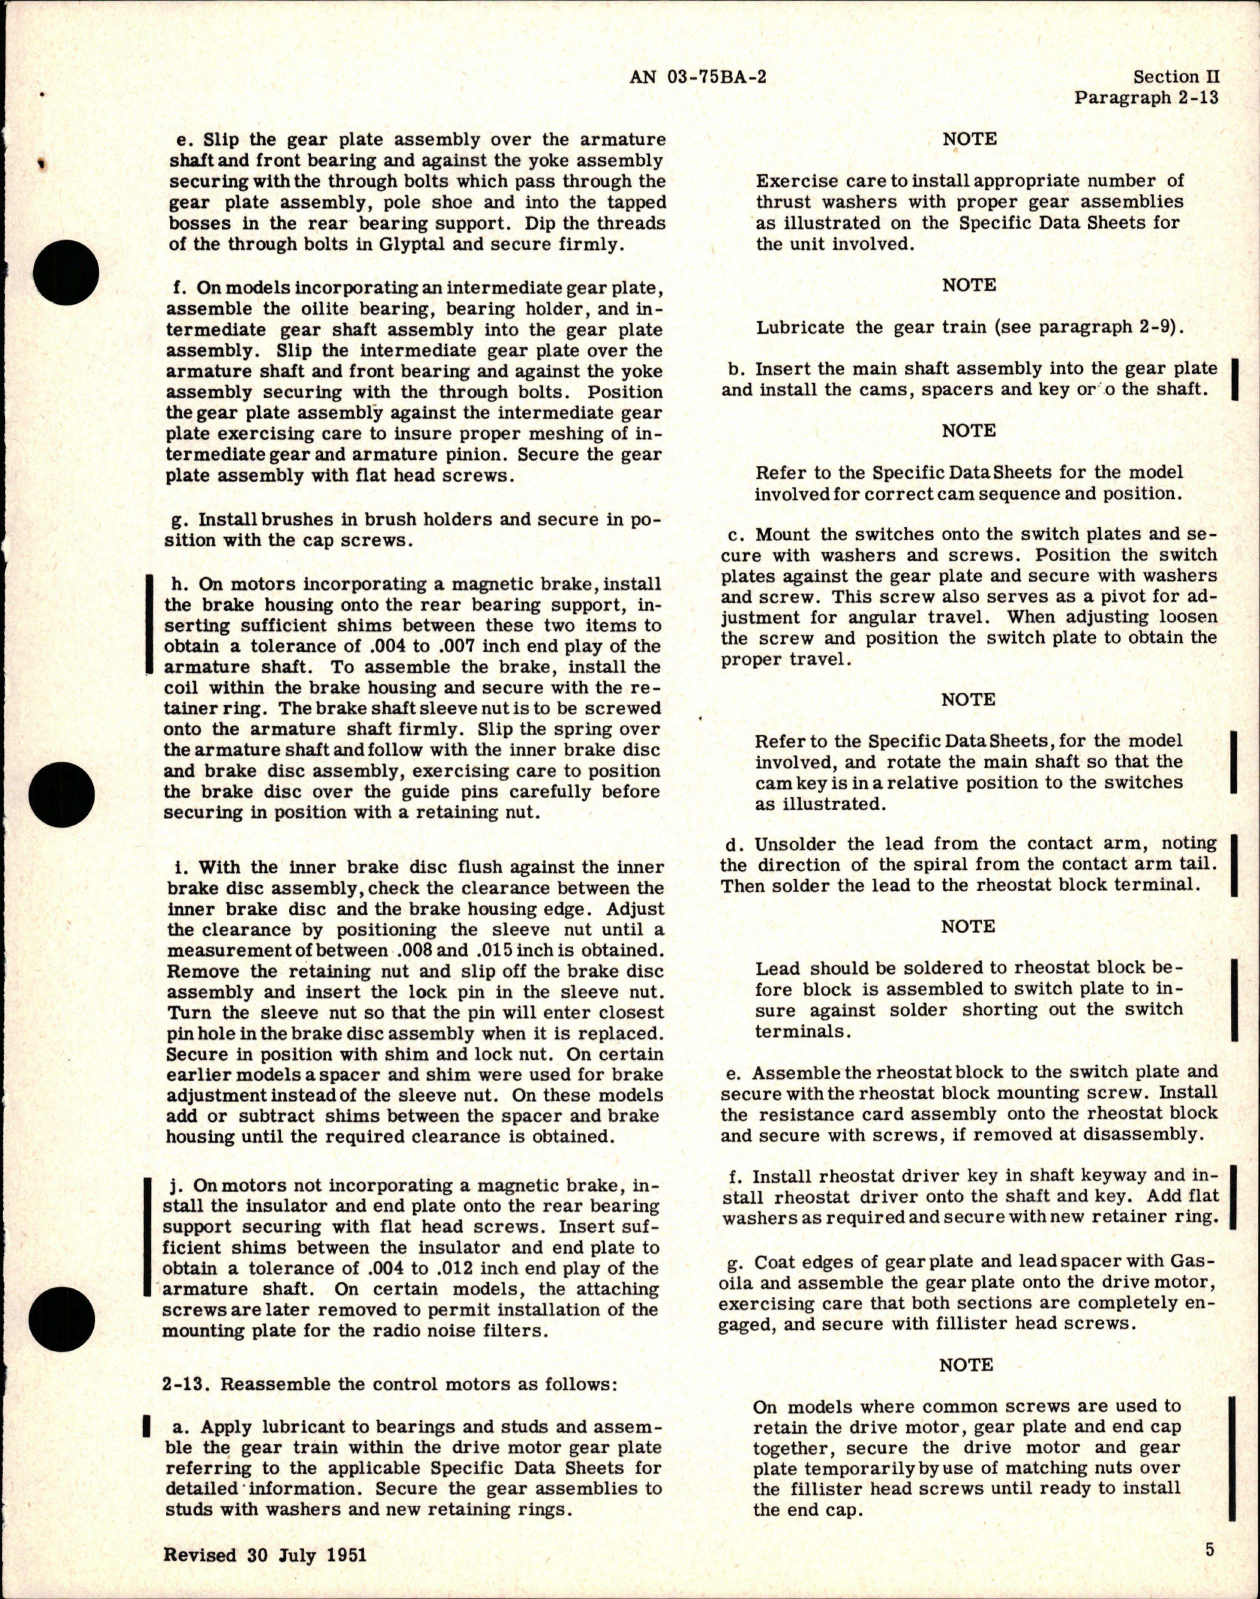 Sample page 5 from AirCorps Library document: Overhaul Instructions for Aircraft Actuators - Model FYLC Series 